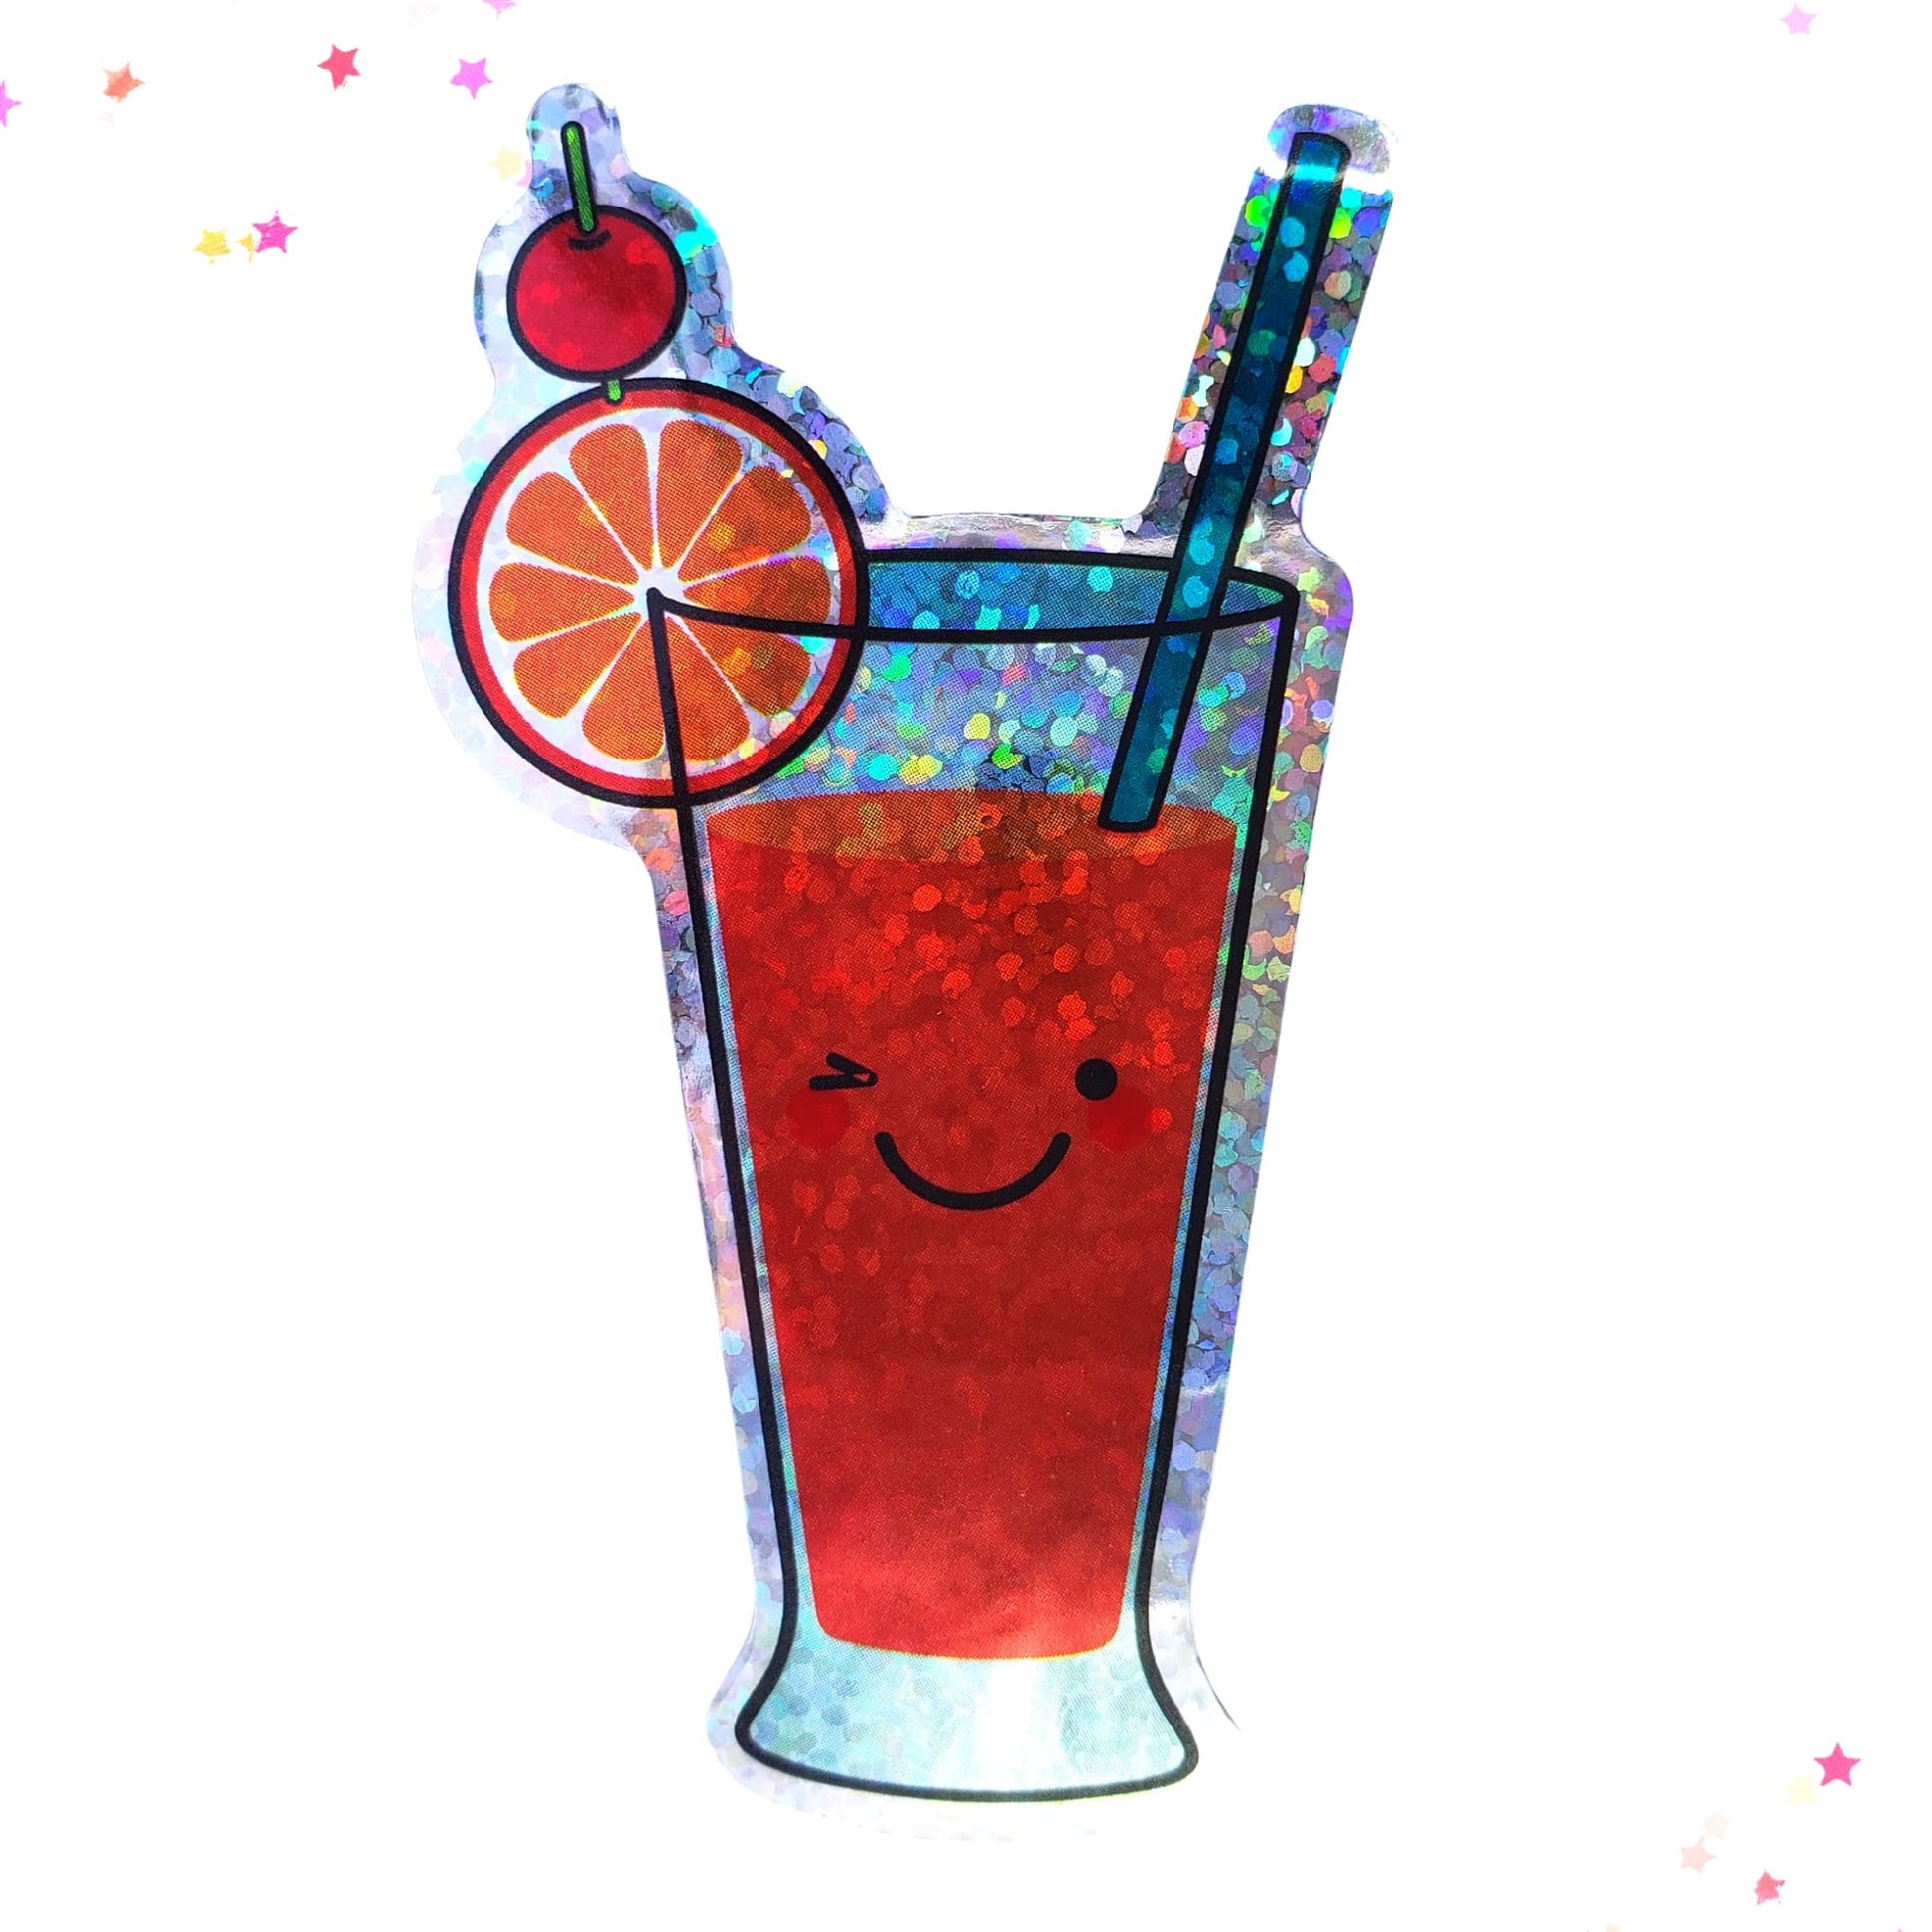 Premium Sticker - Sparkly Holographic Glitter Winking Orange Drink from Confetti Kitty, Only 2.00